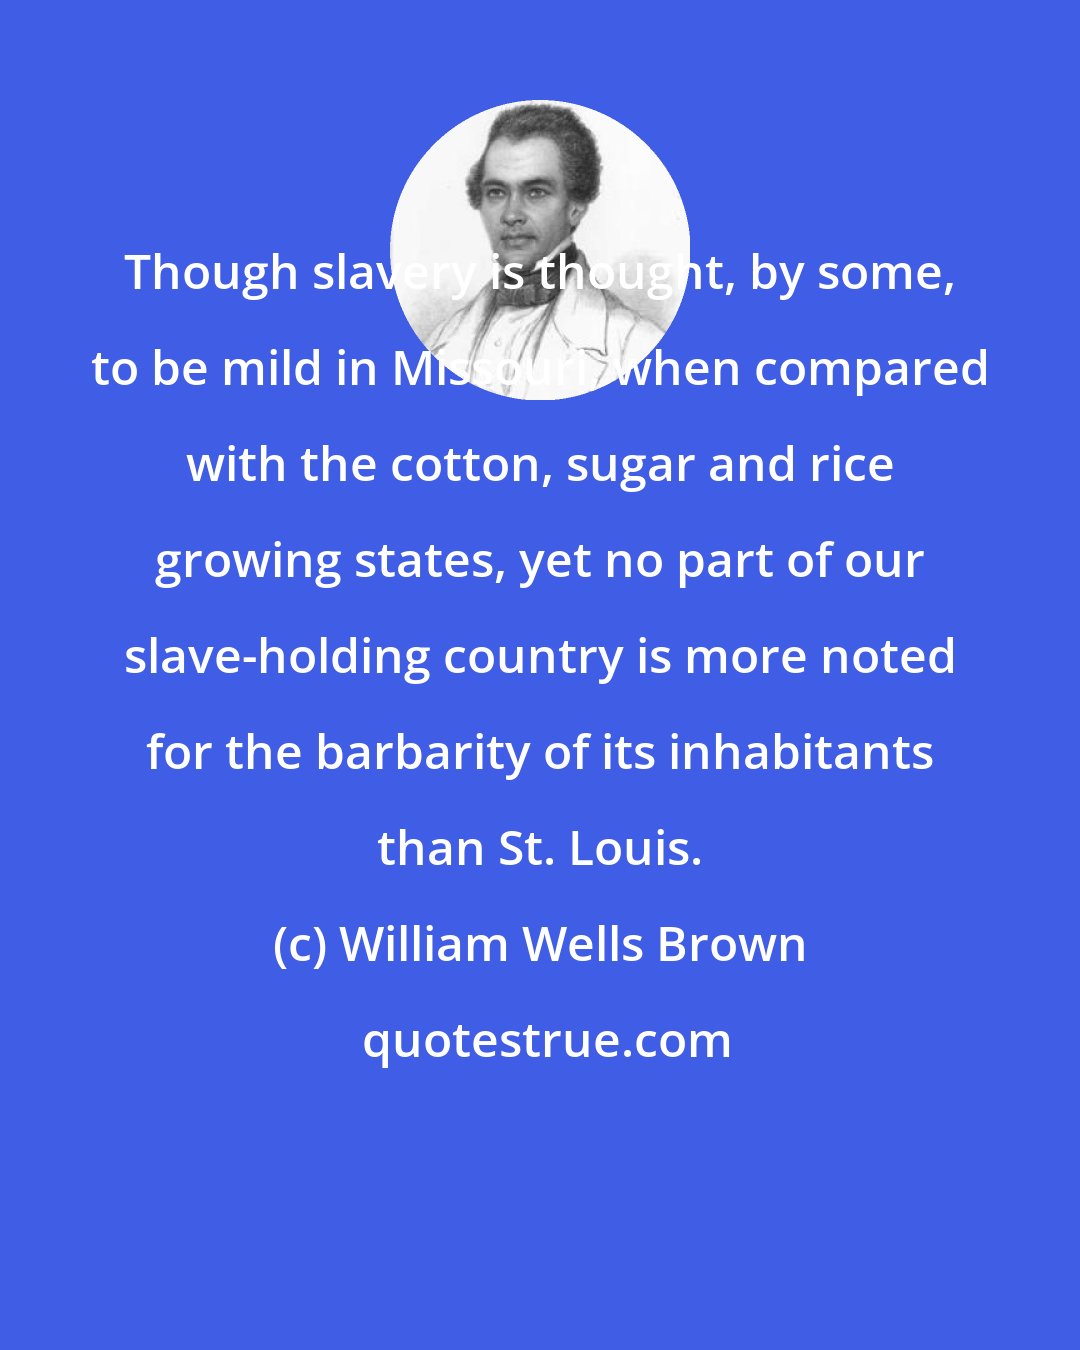 William Wells Brown: Though slavery is thought, by some, to be mild in Missouri, when compared with the cotton, sugar and rice growing states, yet no part of our slave-holding country is more noted for the barbarity of its inhabitants than St. Louis.